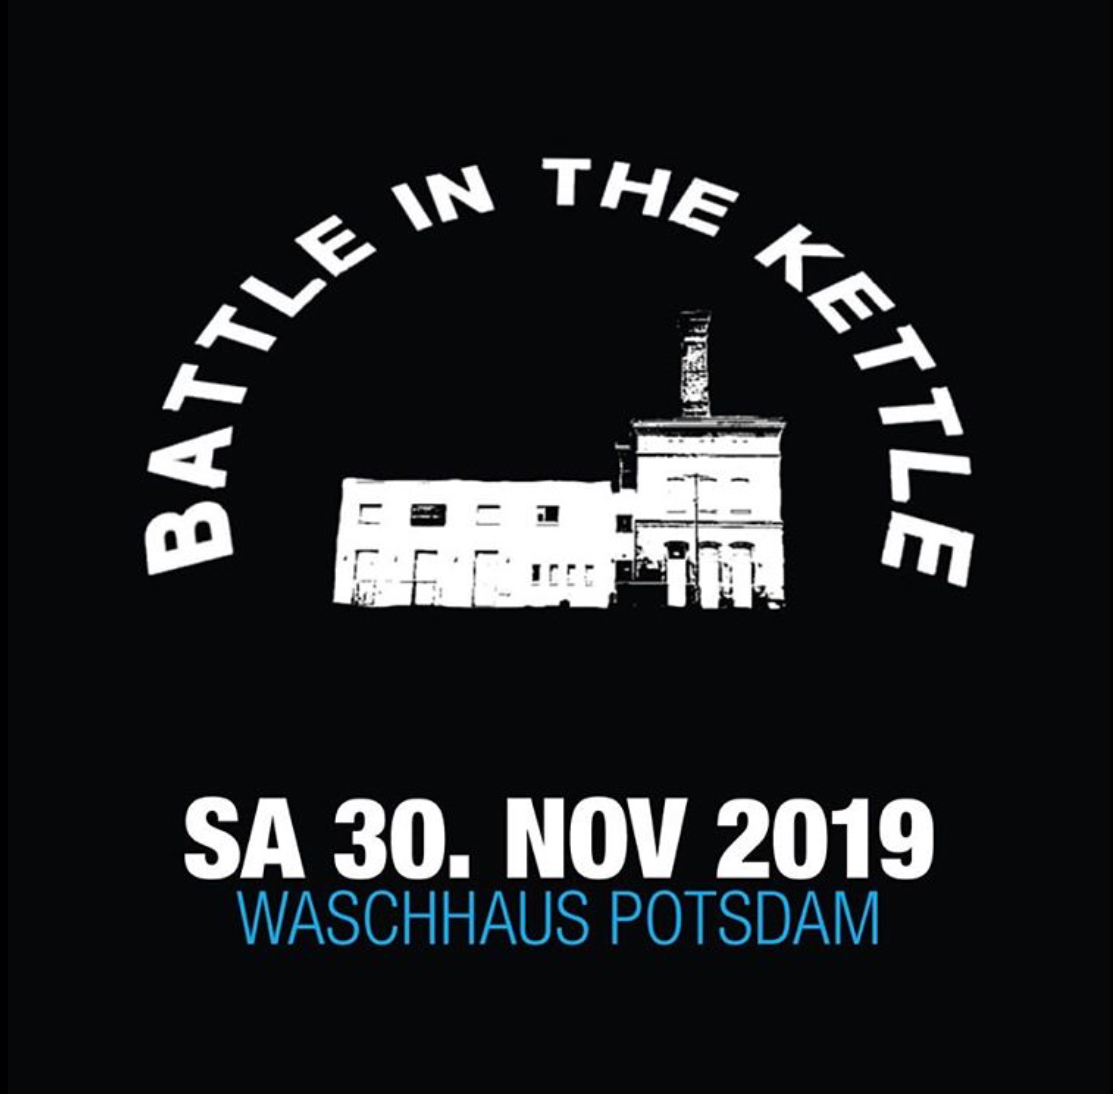 Battle In The Kettle poster